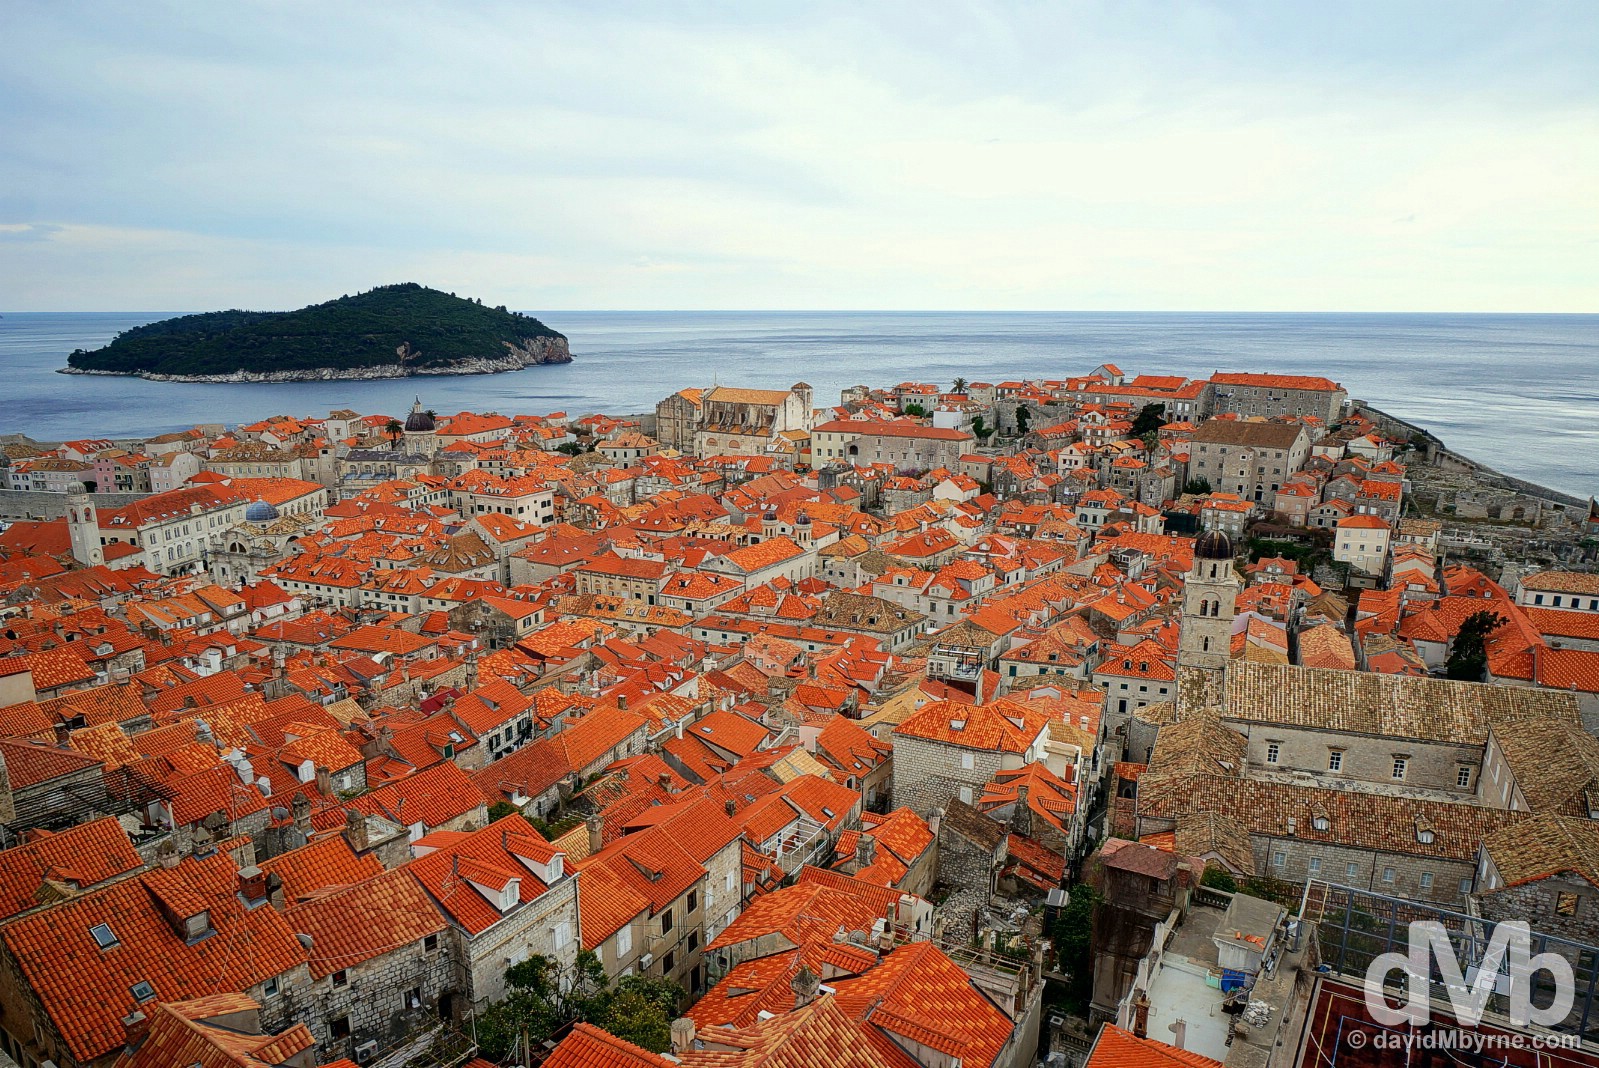 Old Town Dubrovnik as seen from the Old Town walls. Dubrovnik, Croatia. April 7, 2015.